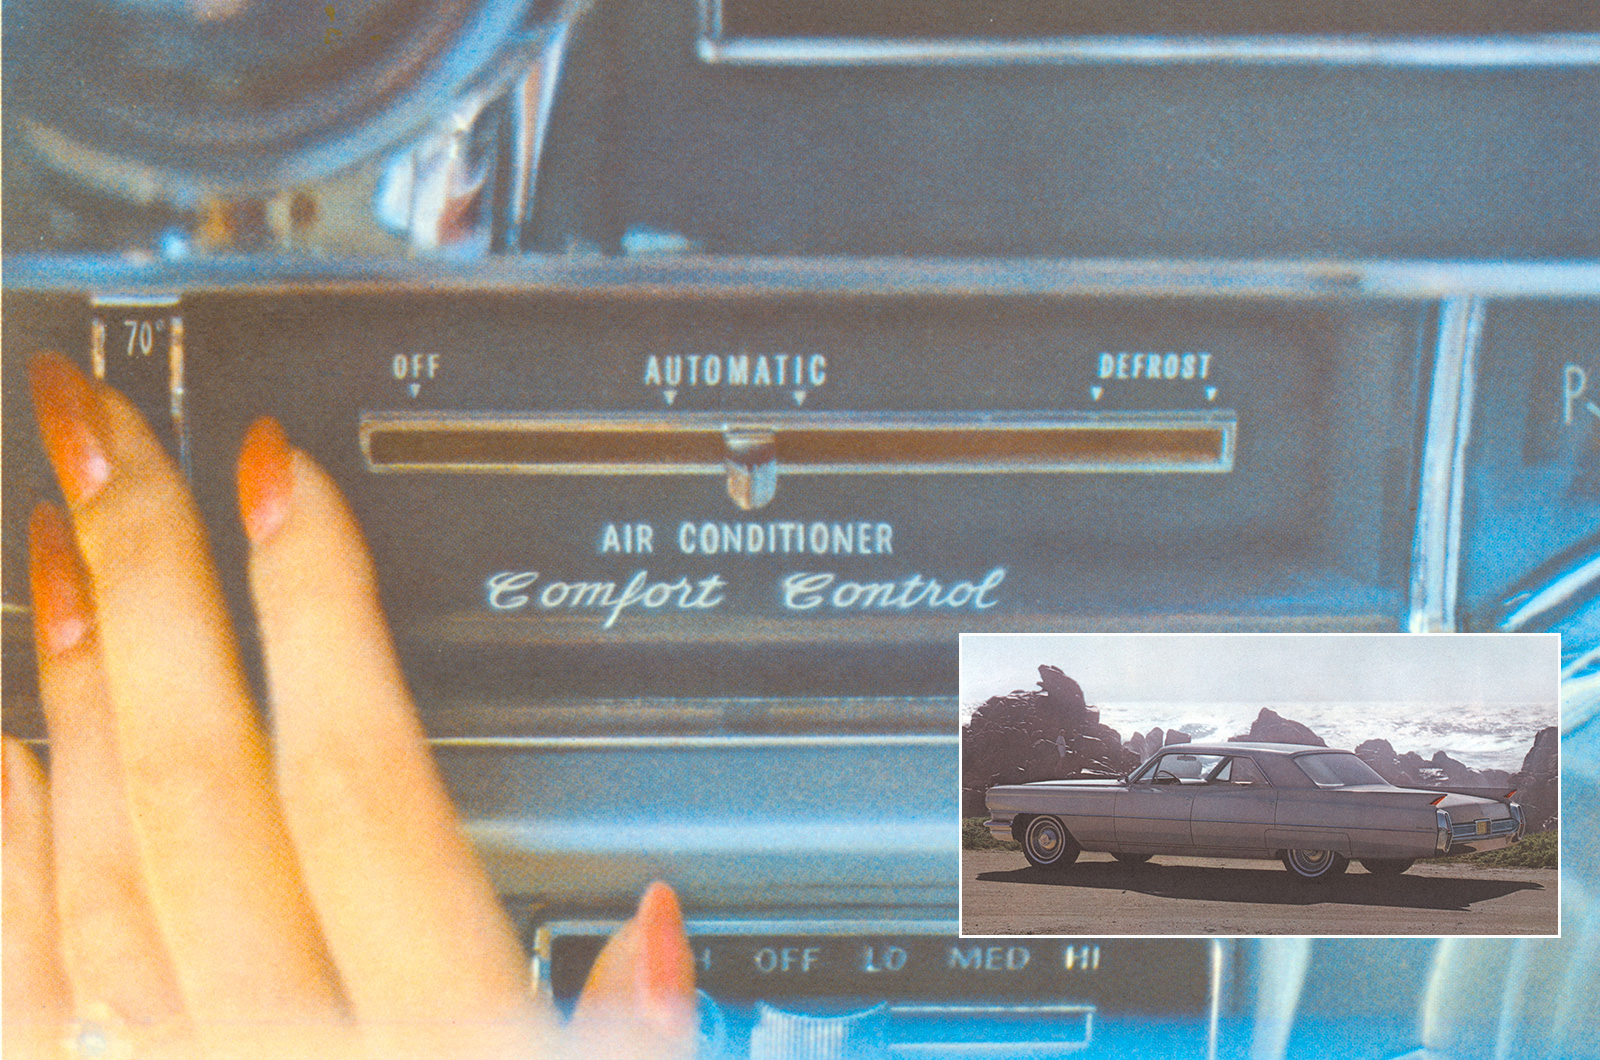 <p>After the Nash breakthrough in 1954, air conditioning rapidly became a must-have item for cars in America, and then the battle was on to improve it. GM got there first, fitting automatic ‘<strong>comfort control</strong>’ air conditioning on the 1964 Cadillac Sedan de Ville among certain other models – the driver set the desired temperature, and it did the rest, in theory at least.</p><p><strong>GROUNDBREAKER SCORE: 6 </strong>– while not as huge an advance as air-con itself we still welcome this one.</p>